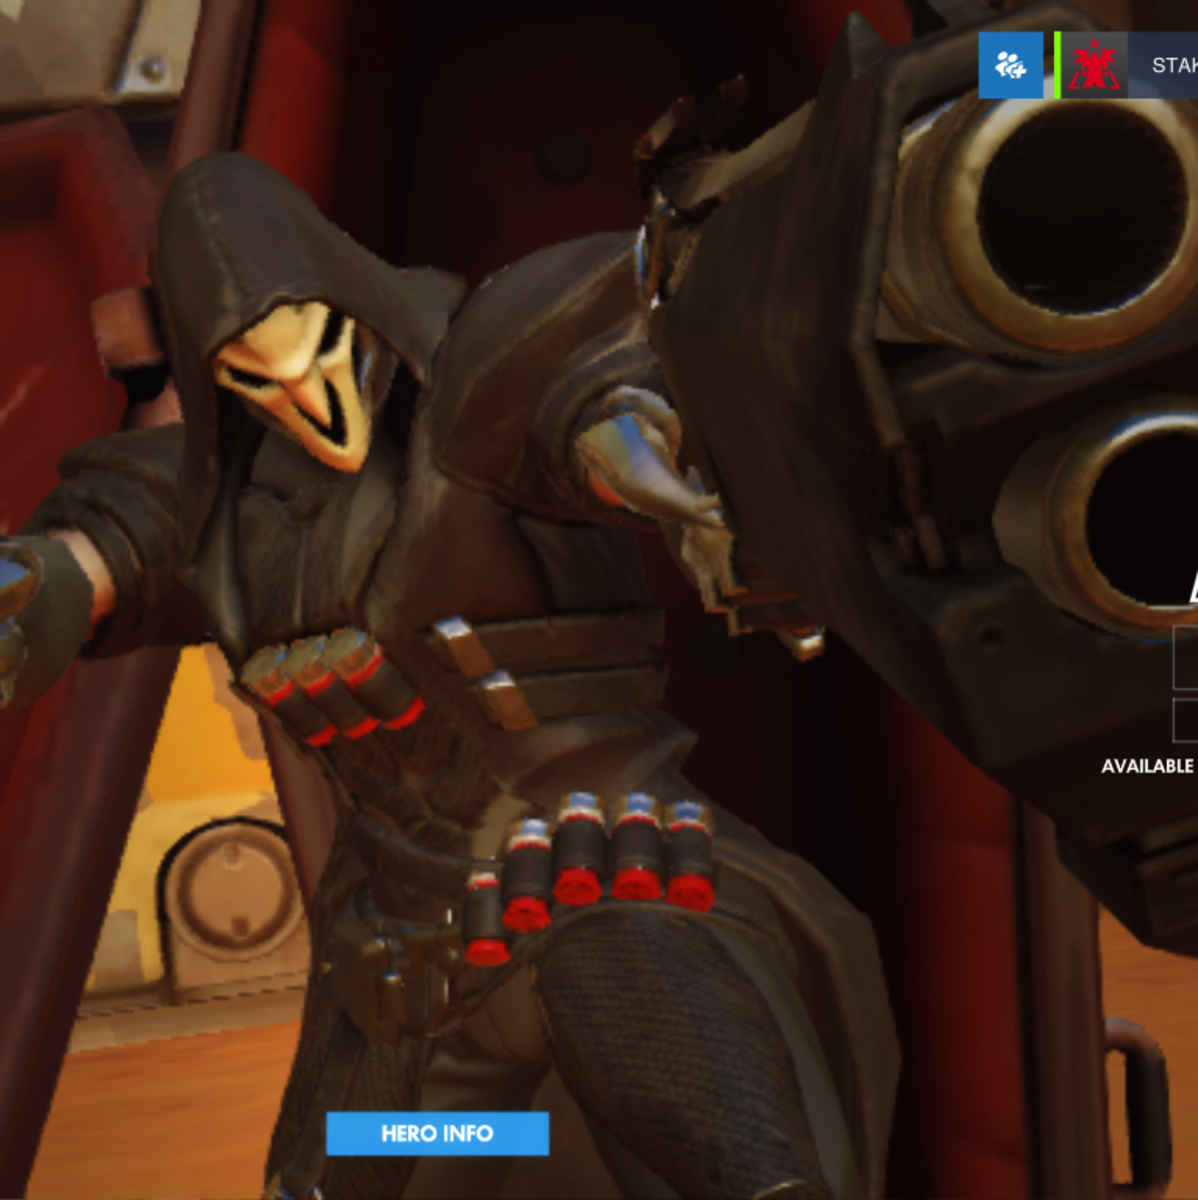 Why is it that he says "Repositioning" when he teleports when he should be saying "Reaper-sitioning"?